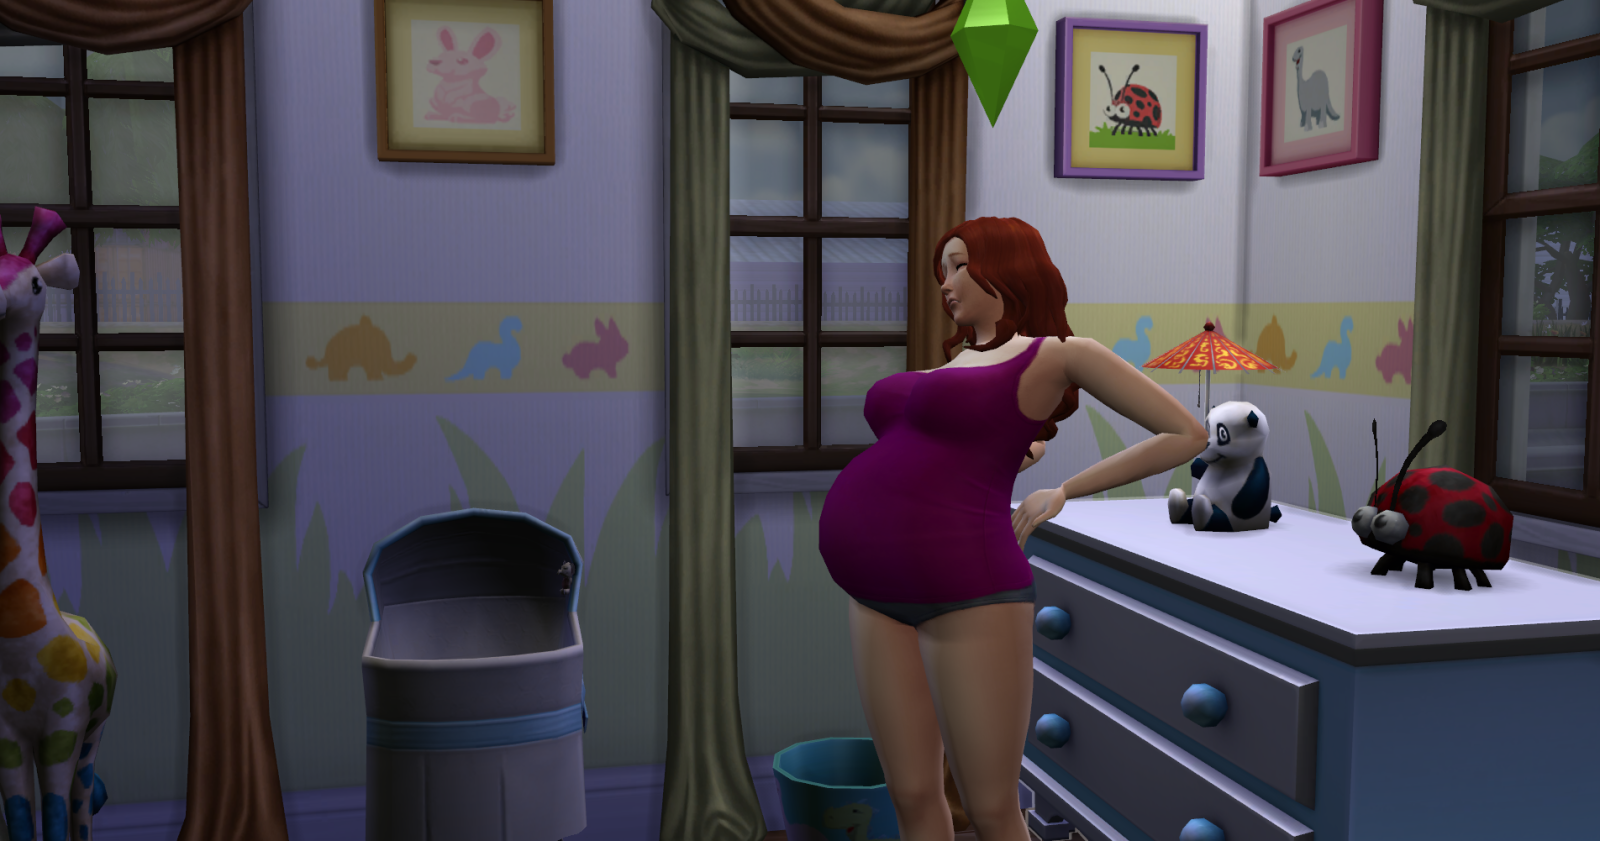 sims 3 pregnant belly mod